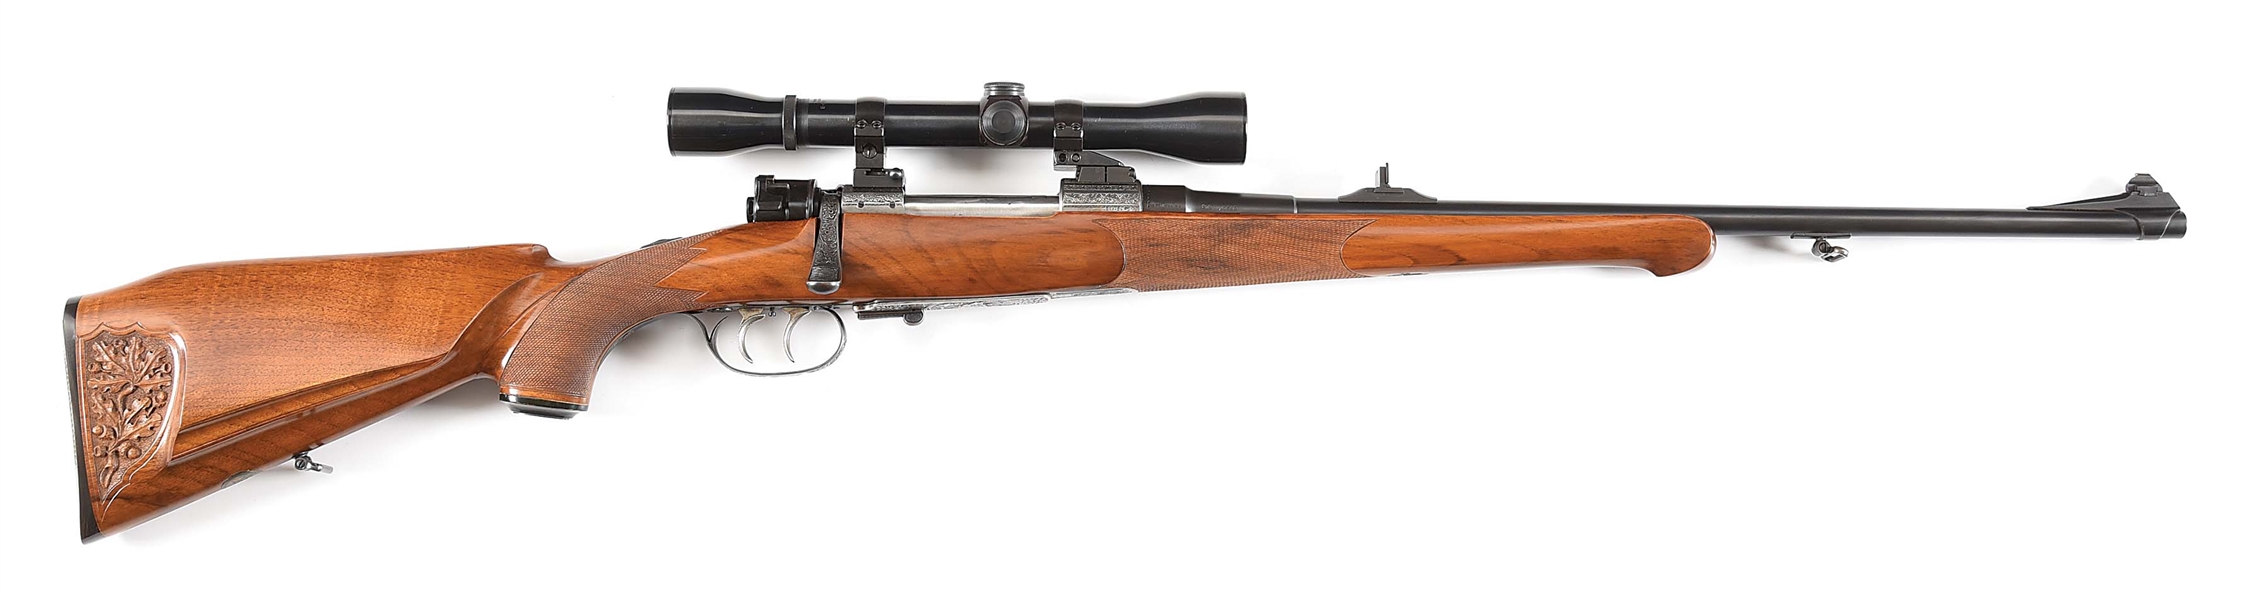 (M) ENGRAVED AUSTRIAN BOLT ACTION SPORTING RIFLE IN .270 WINCHESTER, BUILT ON A MAUSER 98 ACTION.